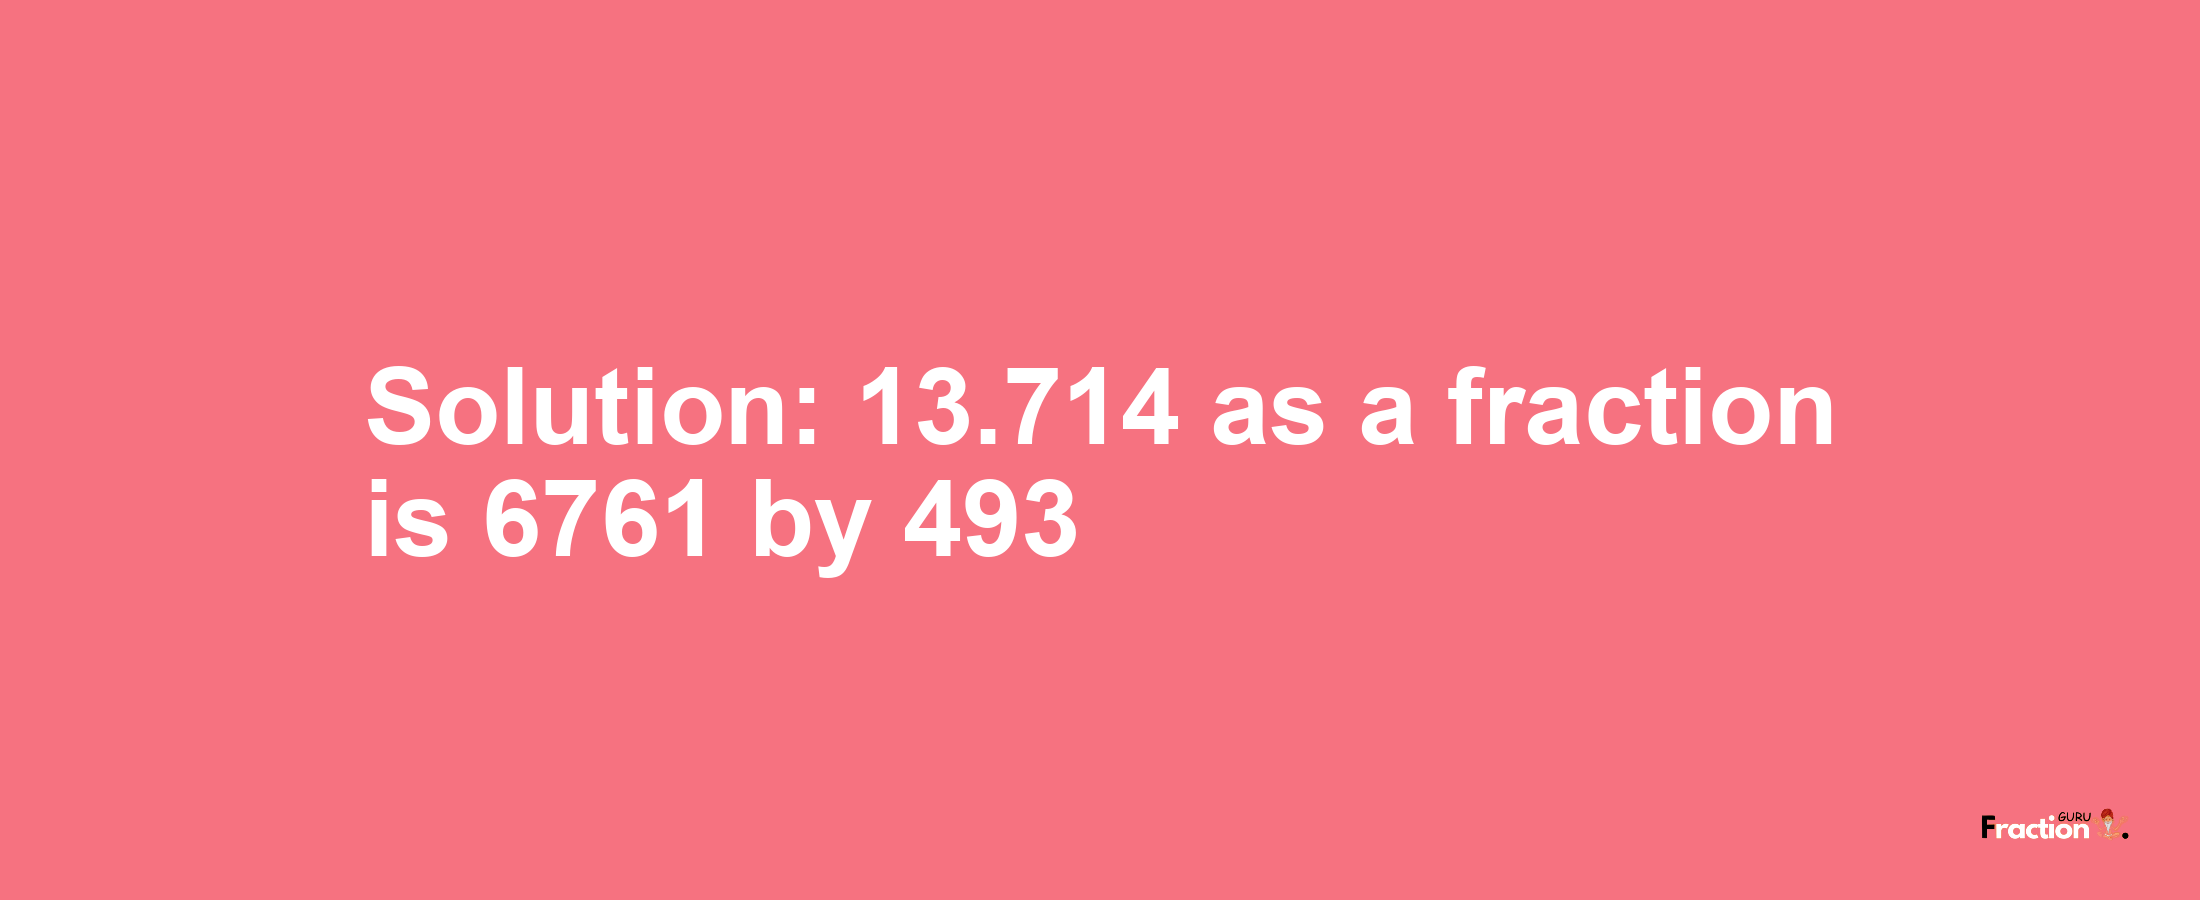 Solution:13.714 as a fraction is 6761/493